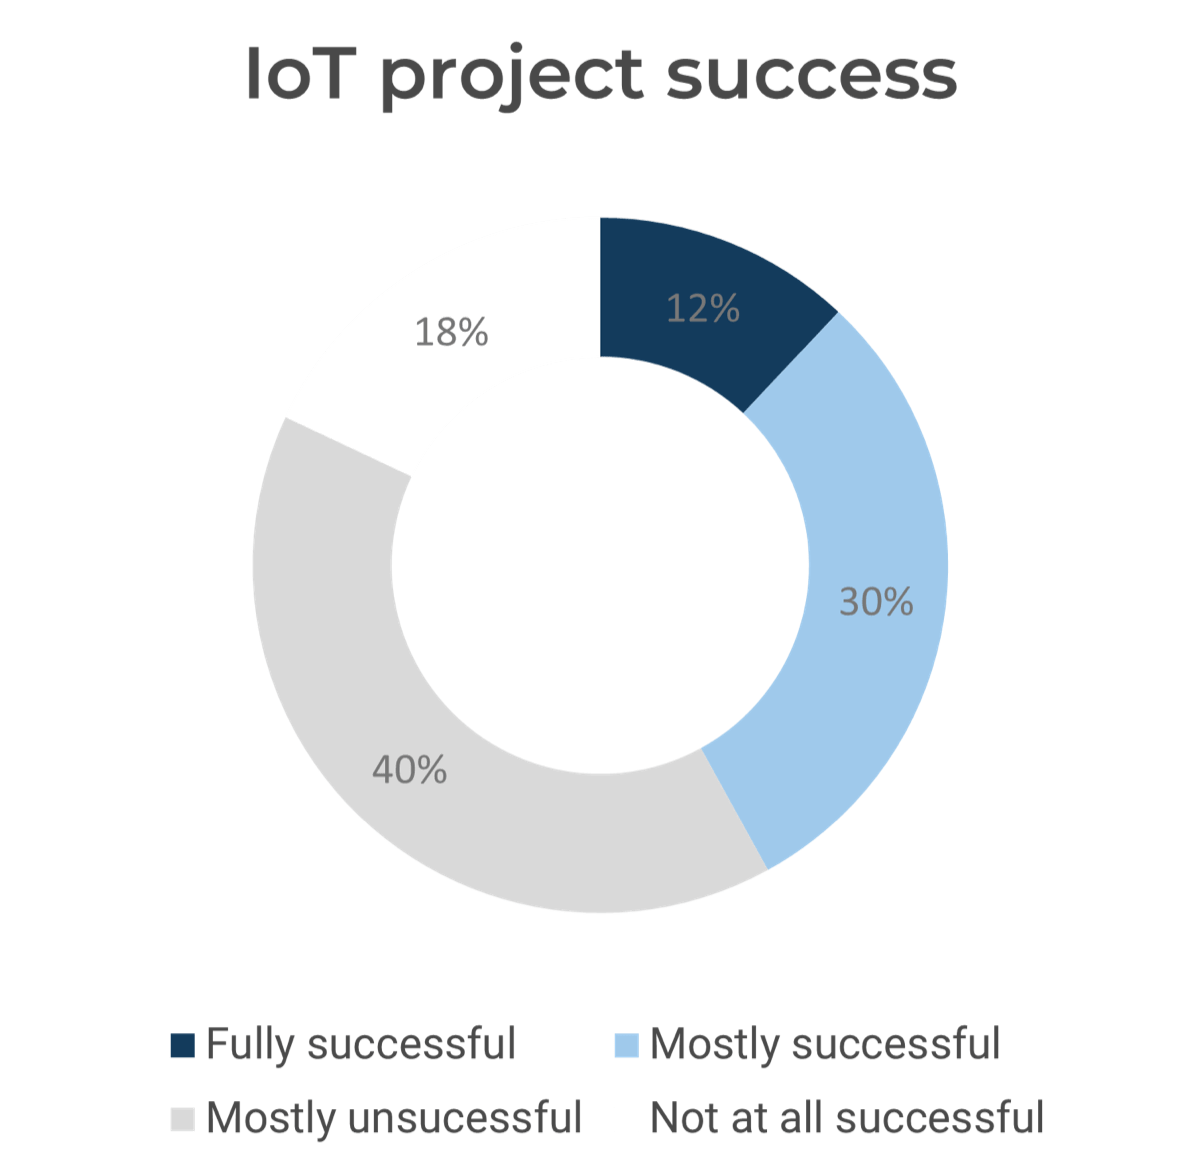 Pie chart titled 'IoT project success' with '12% Fully successful', '30% Mostly successful', '40% Mostly unsuccessful', and 'Not at all successful'.